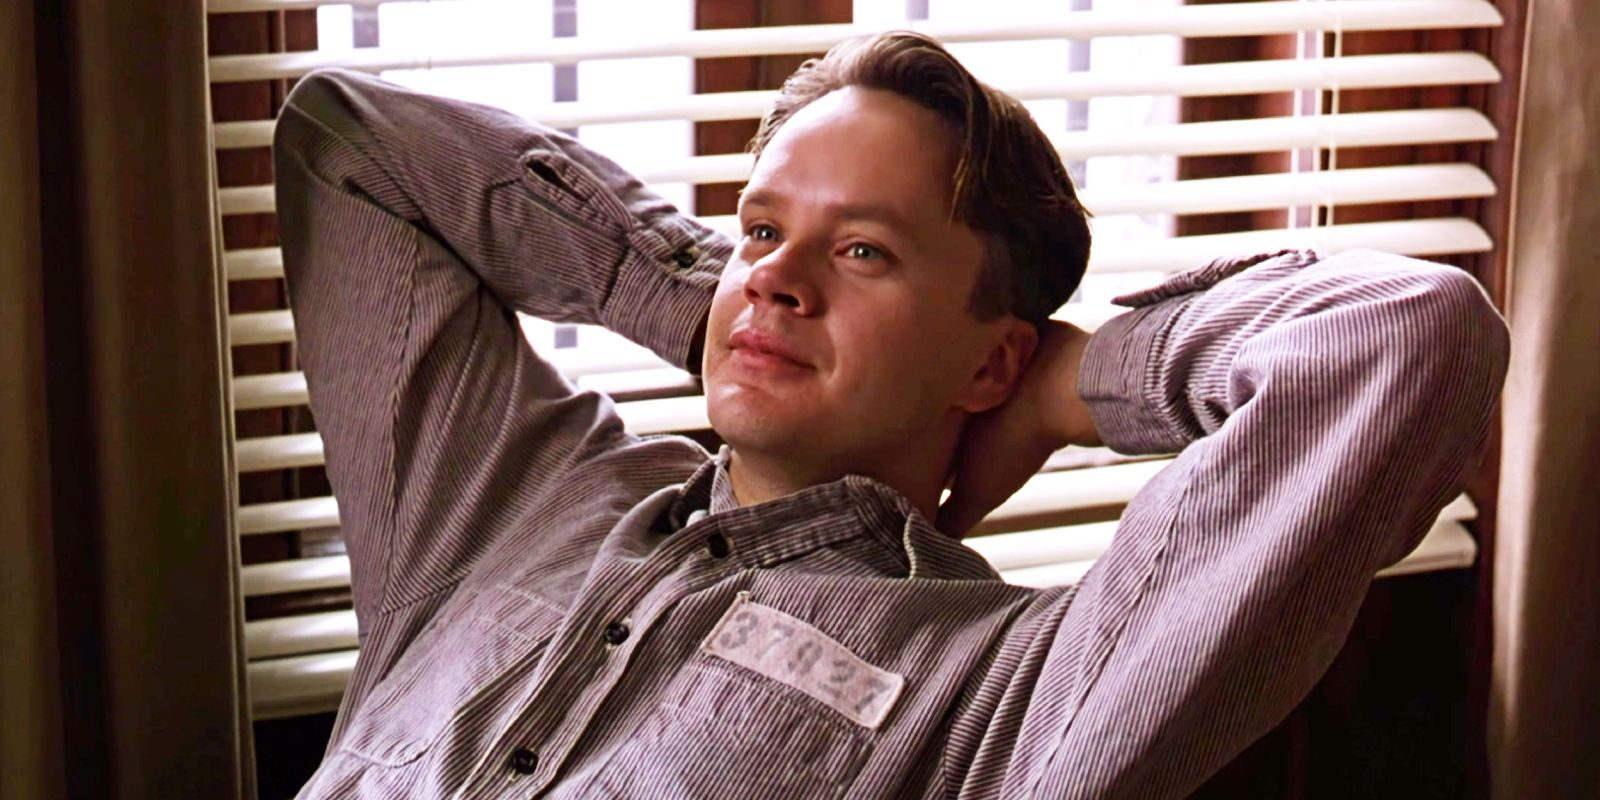 Tim Robbins smiling as Andy in The Shawshank Redemption